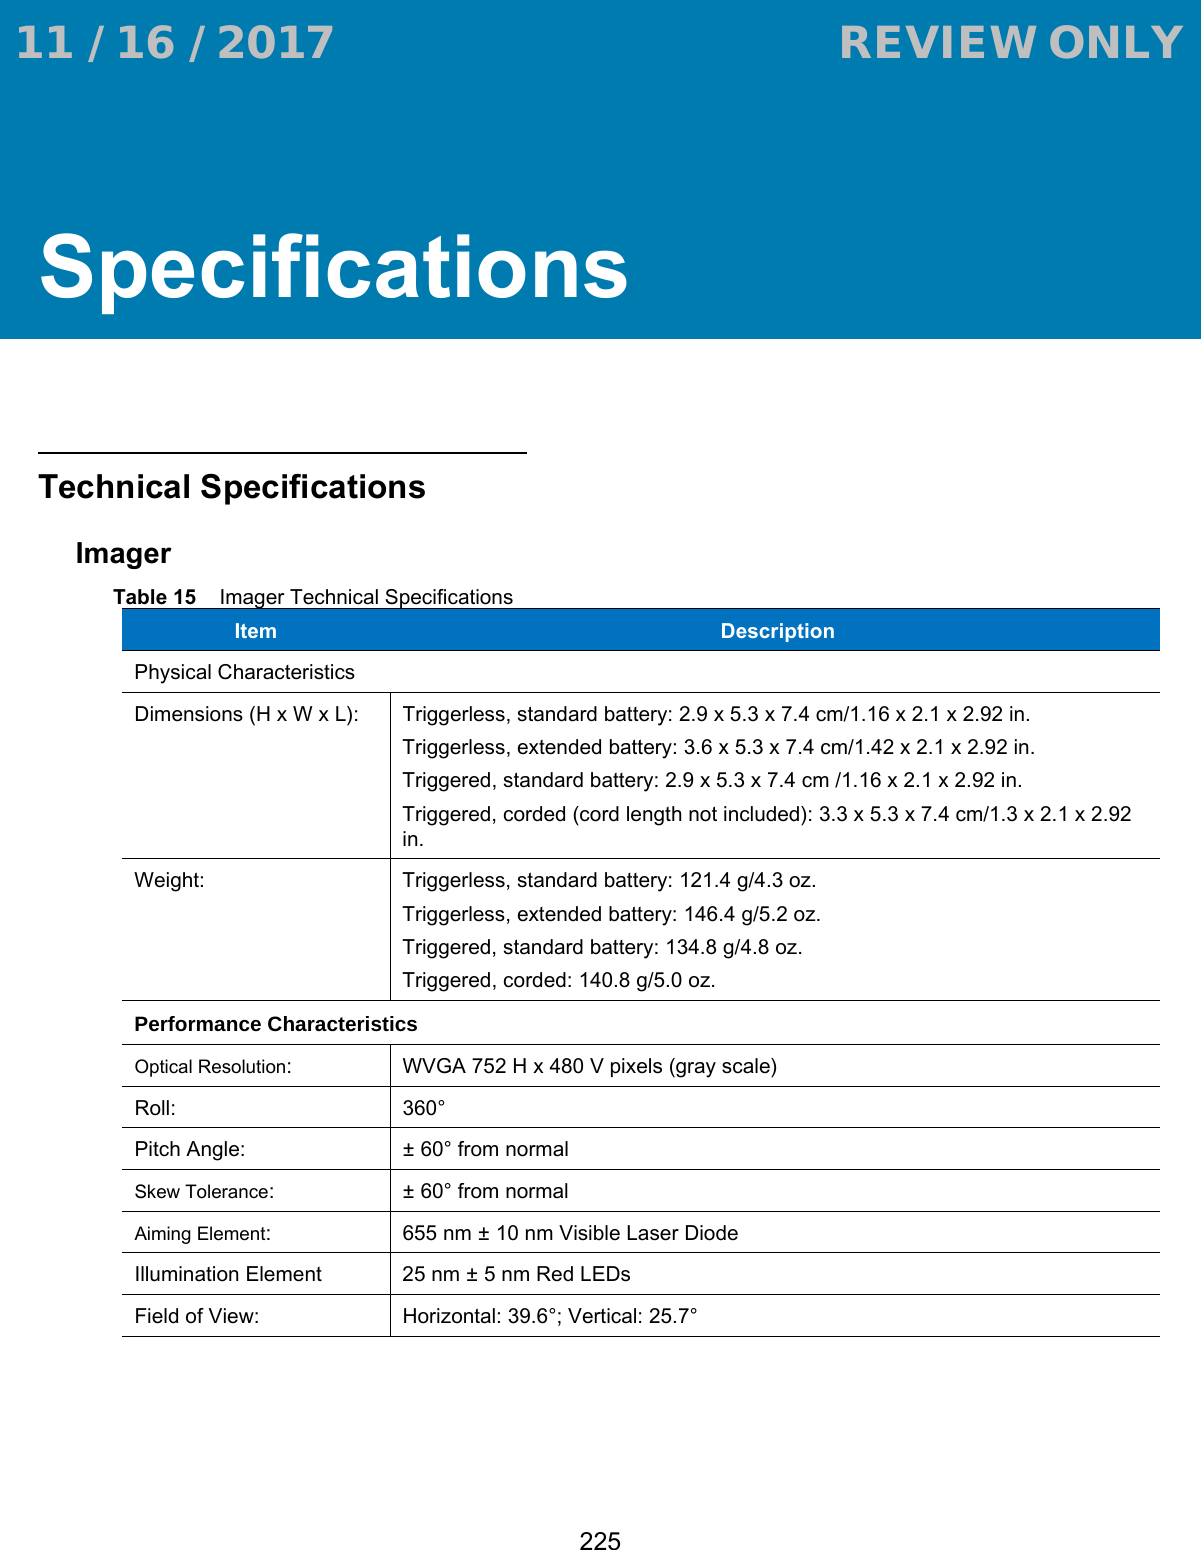 225SpecificationsTechnical SpecificationsImagerTable 15    Imager Technical SpecificationsItem  DescriptionPhysical CharacteristicsDimensions (H x W x L): Triggerless, standard battery: 2.9 x 5.3 x 7.4 cm/1.16 x 2.1 x 2.92 in.Triggerless, extended battery: 3.6 x 5.3 x 7.4 cm/1.42 x 2.1 x 2.92 in.Triggered, standard battery: 2.9 x 5.3 x 7.4 cm /1.16 x 2.1 x 2.92 in.Triggered, corded (cord length not included): 3.3 x 5.3 x 7.4 cm/1.3 x 2.1 x 2.92 in.Weight: Triggerless, standard battery: 121.4 g/4.3 oz.Triggerless, extended battery: 146.4 g/5.2 oz.Triggered, standard battery: 134.8 g/4.8 oz.Triggered, corded: 140.8 g/5.0 oz.Performance CharacteristicsOptical Resolution: WVGA 752 H x 480 V pixels (gray scale)Roll: 360°Pitch Angle: ± 60° from normalSkew Tolerance: ± 60° from normalAiming Element: 655 nm ± 10 nm Visible Laser DiodeIllumination Element 25 nm ± 5 nm Red LEDsField of View: Horizontal: 39.6°; Vertical: 25.7° 11 / 16 / 2017                                  REVIEW ONLY                             REVIEW ONLY - REVIEW ONLY - REVIEW ONLY